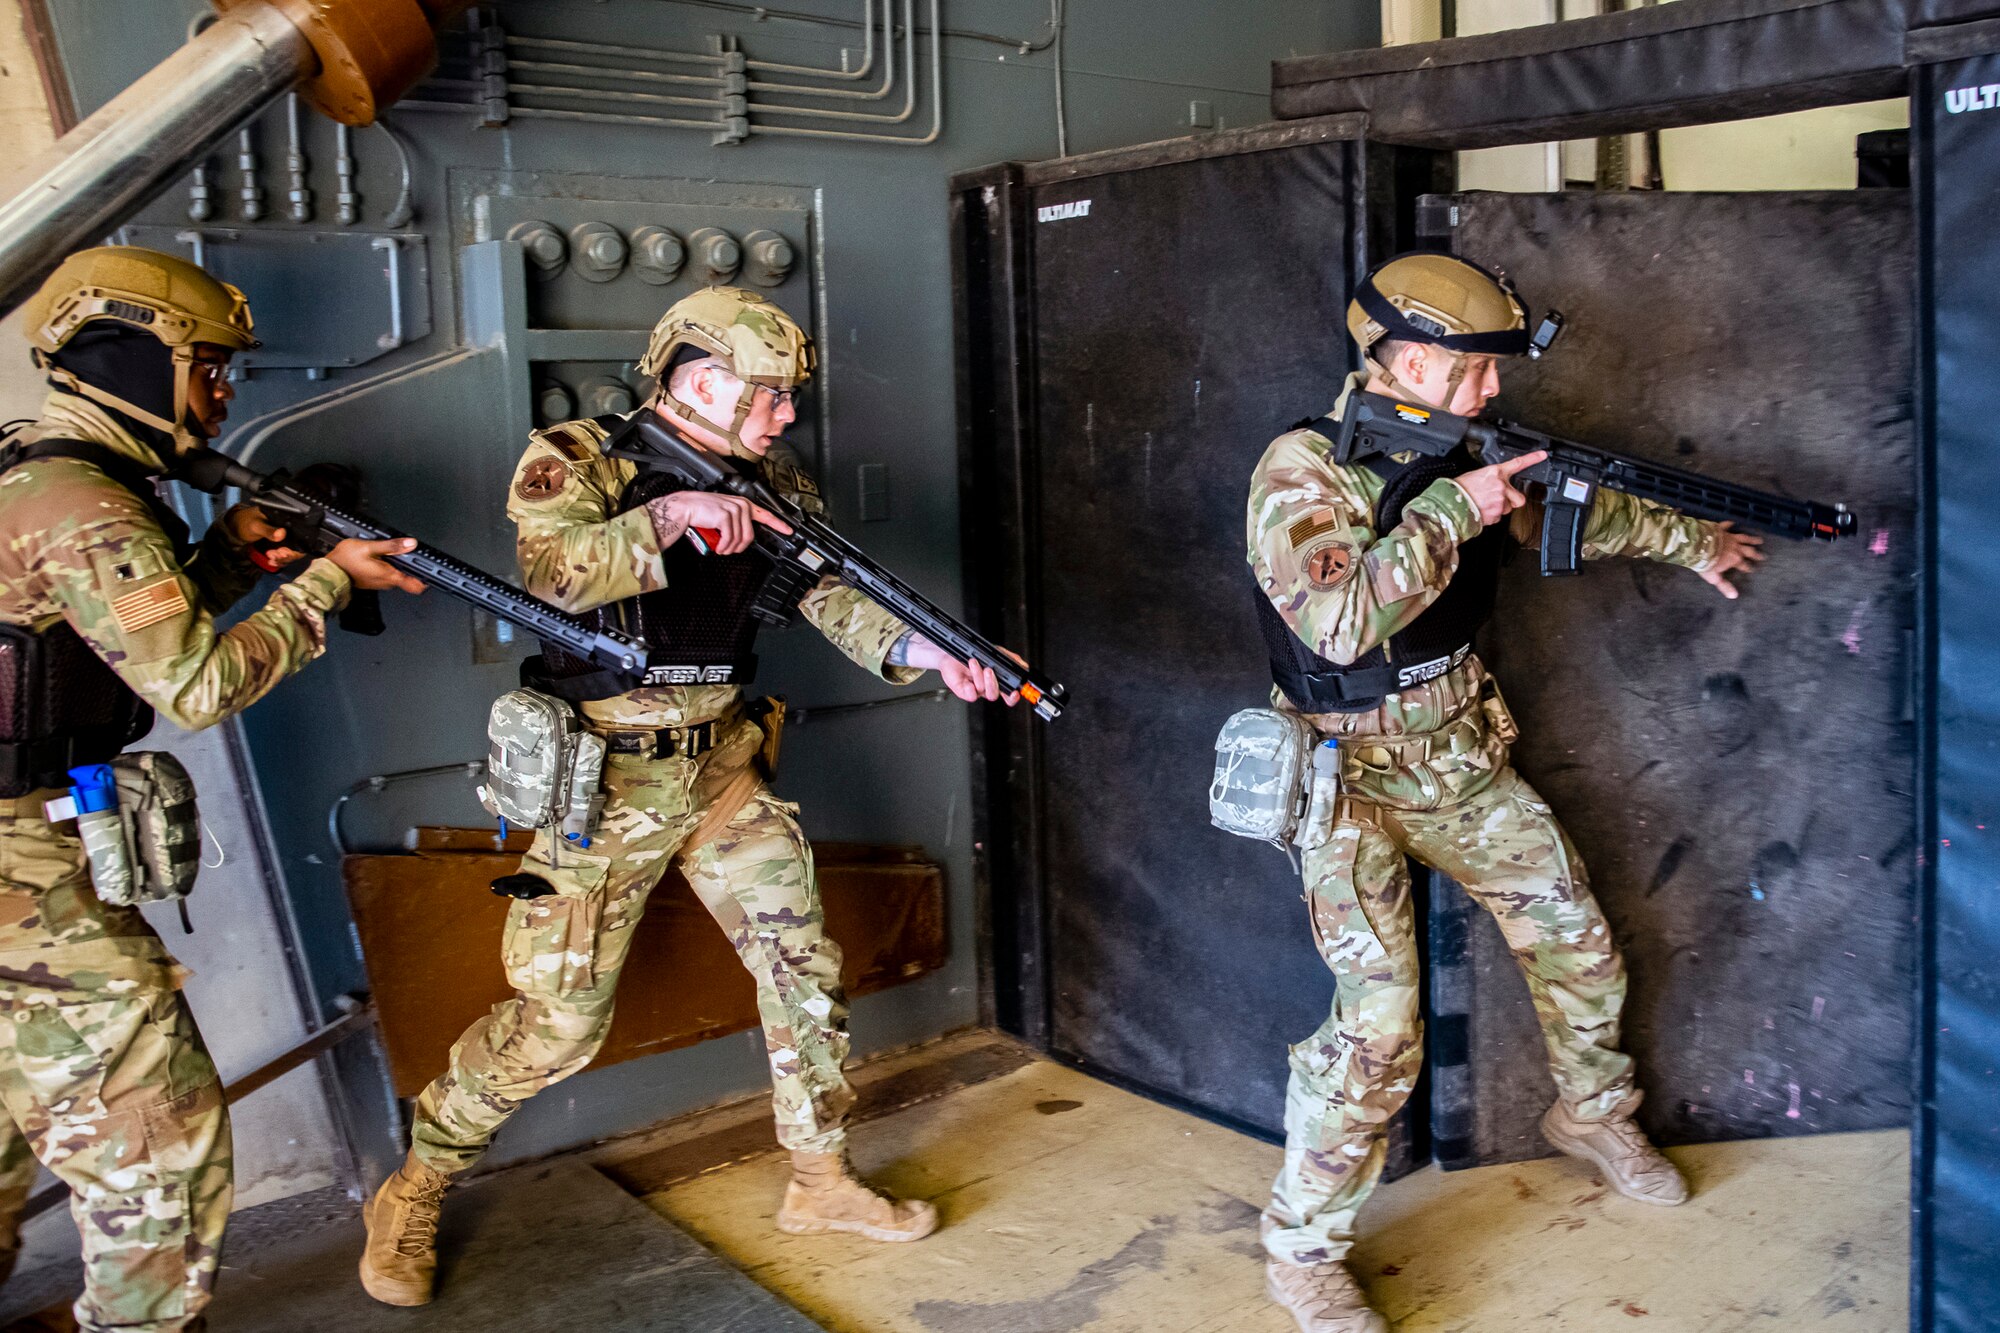 Airmen from the 423d Security Forces Squadron clear a room during an active shooter exercise at RAF Molesworth, England, Dec. 16, 2022. The 423d SFS and Medical Squadrons conducted the exercise to evaluate their overall readiness and response capabilities to an emergency situation. (U.S. Air Force photo by Staff Sgt. Eugene Oliver)